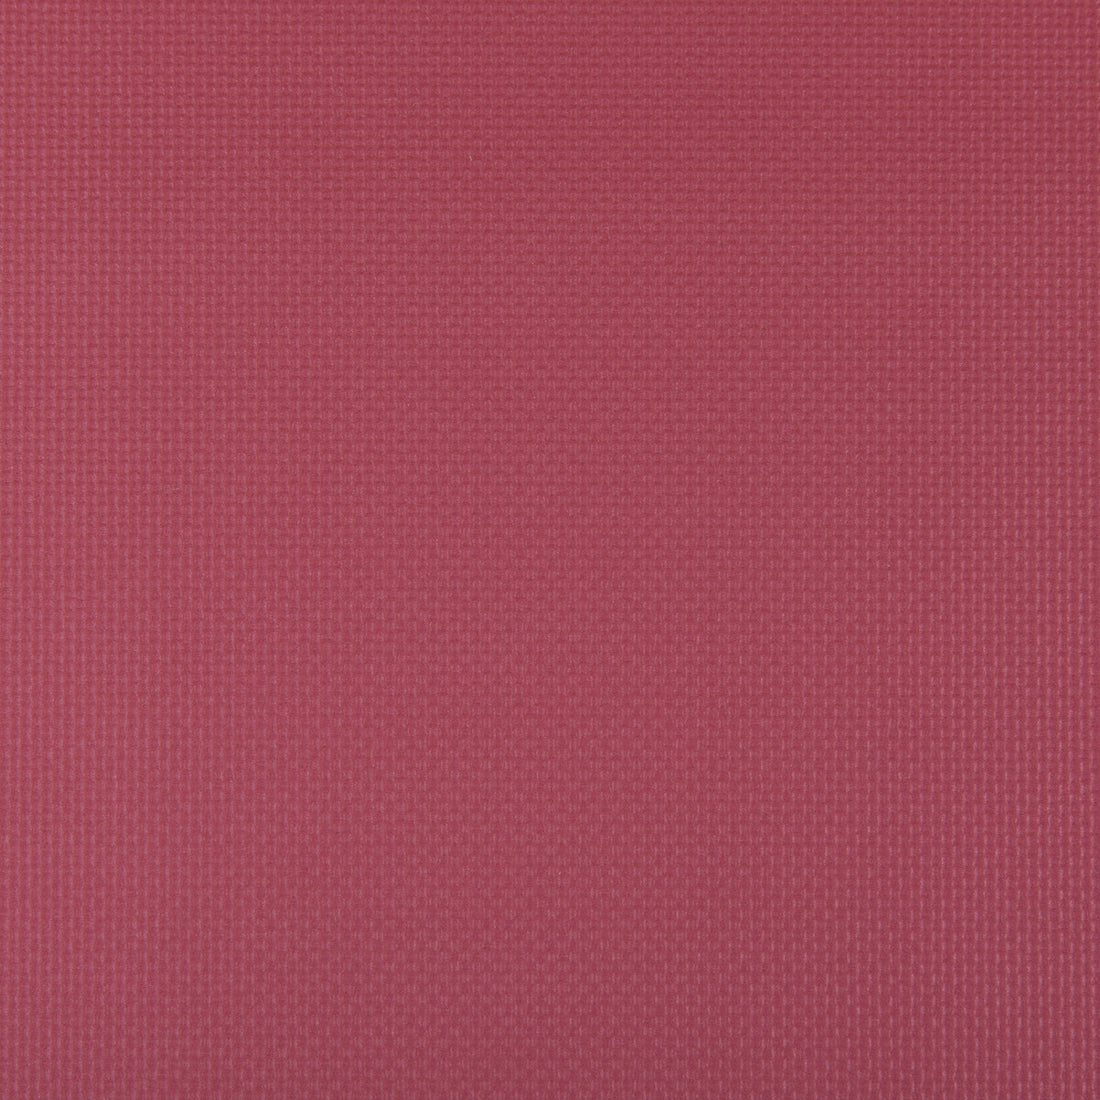 Sidney fabric in raspberry color - pattern SIDNEY.97.0 - by Kravet Contract